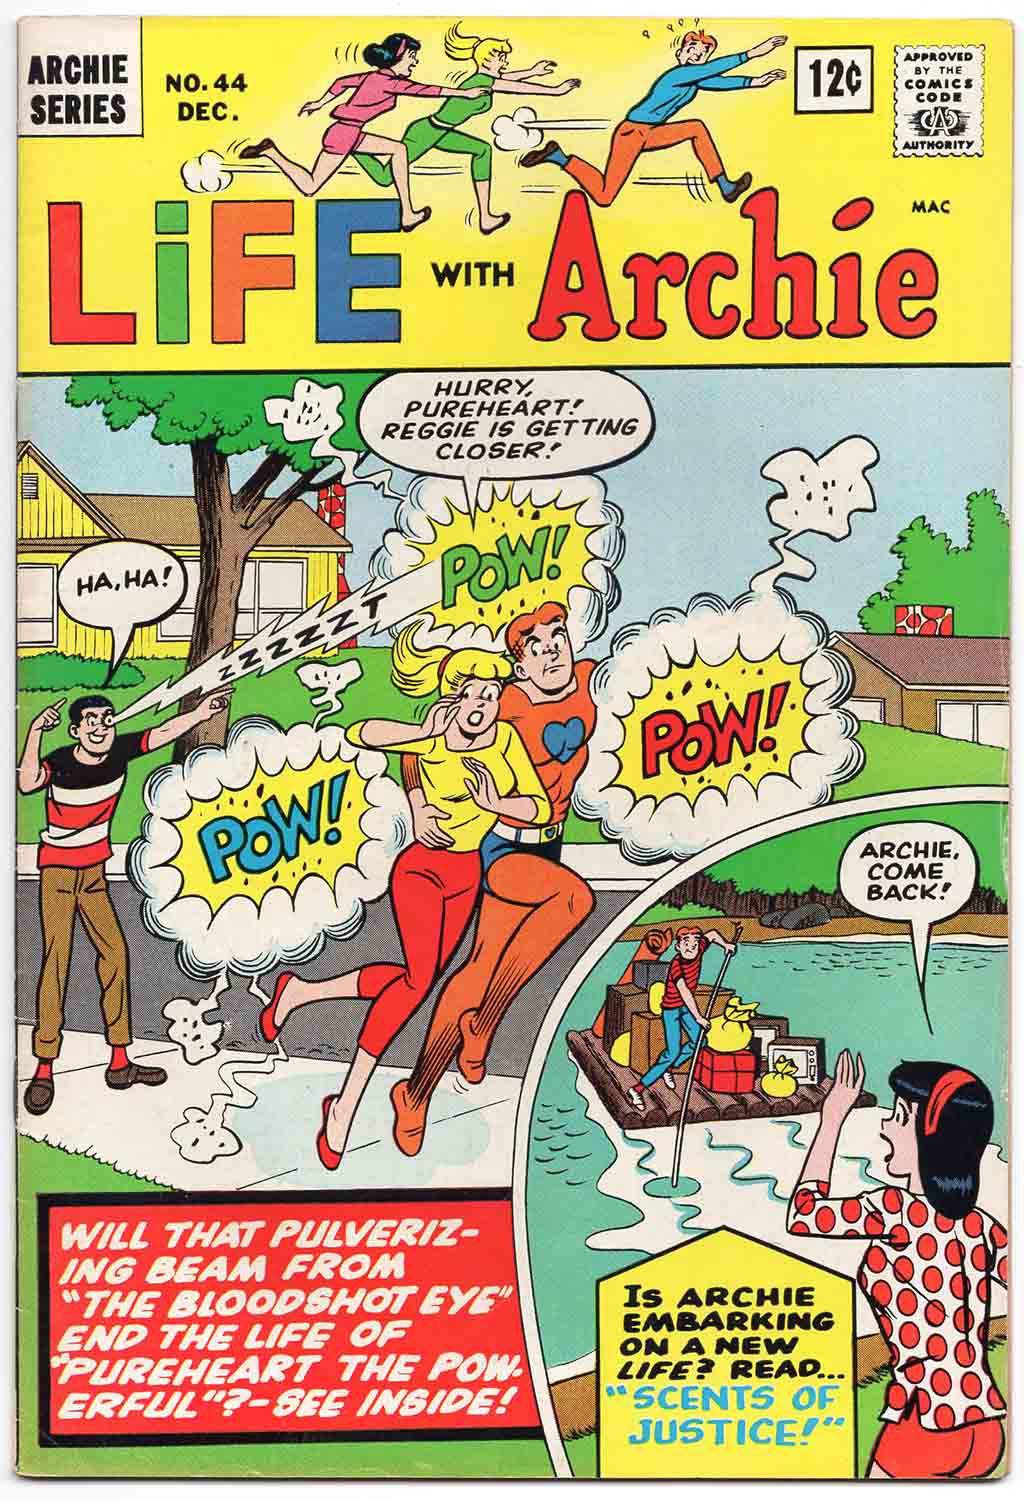 Life with Archie #44